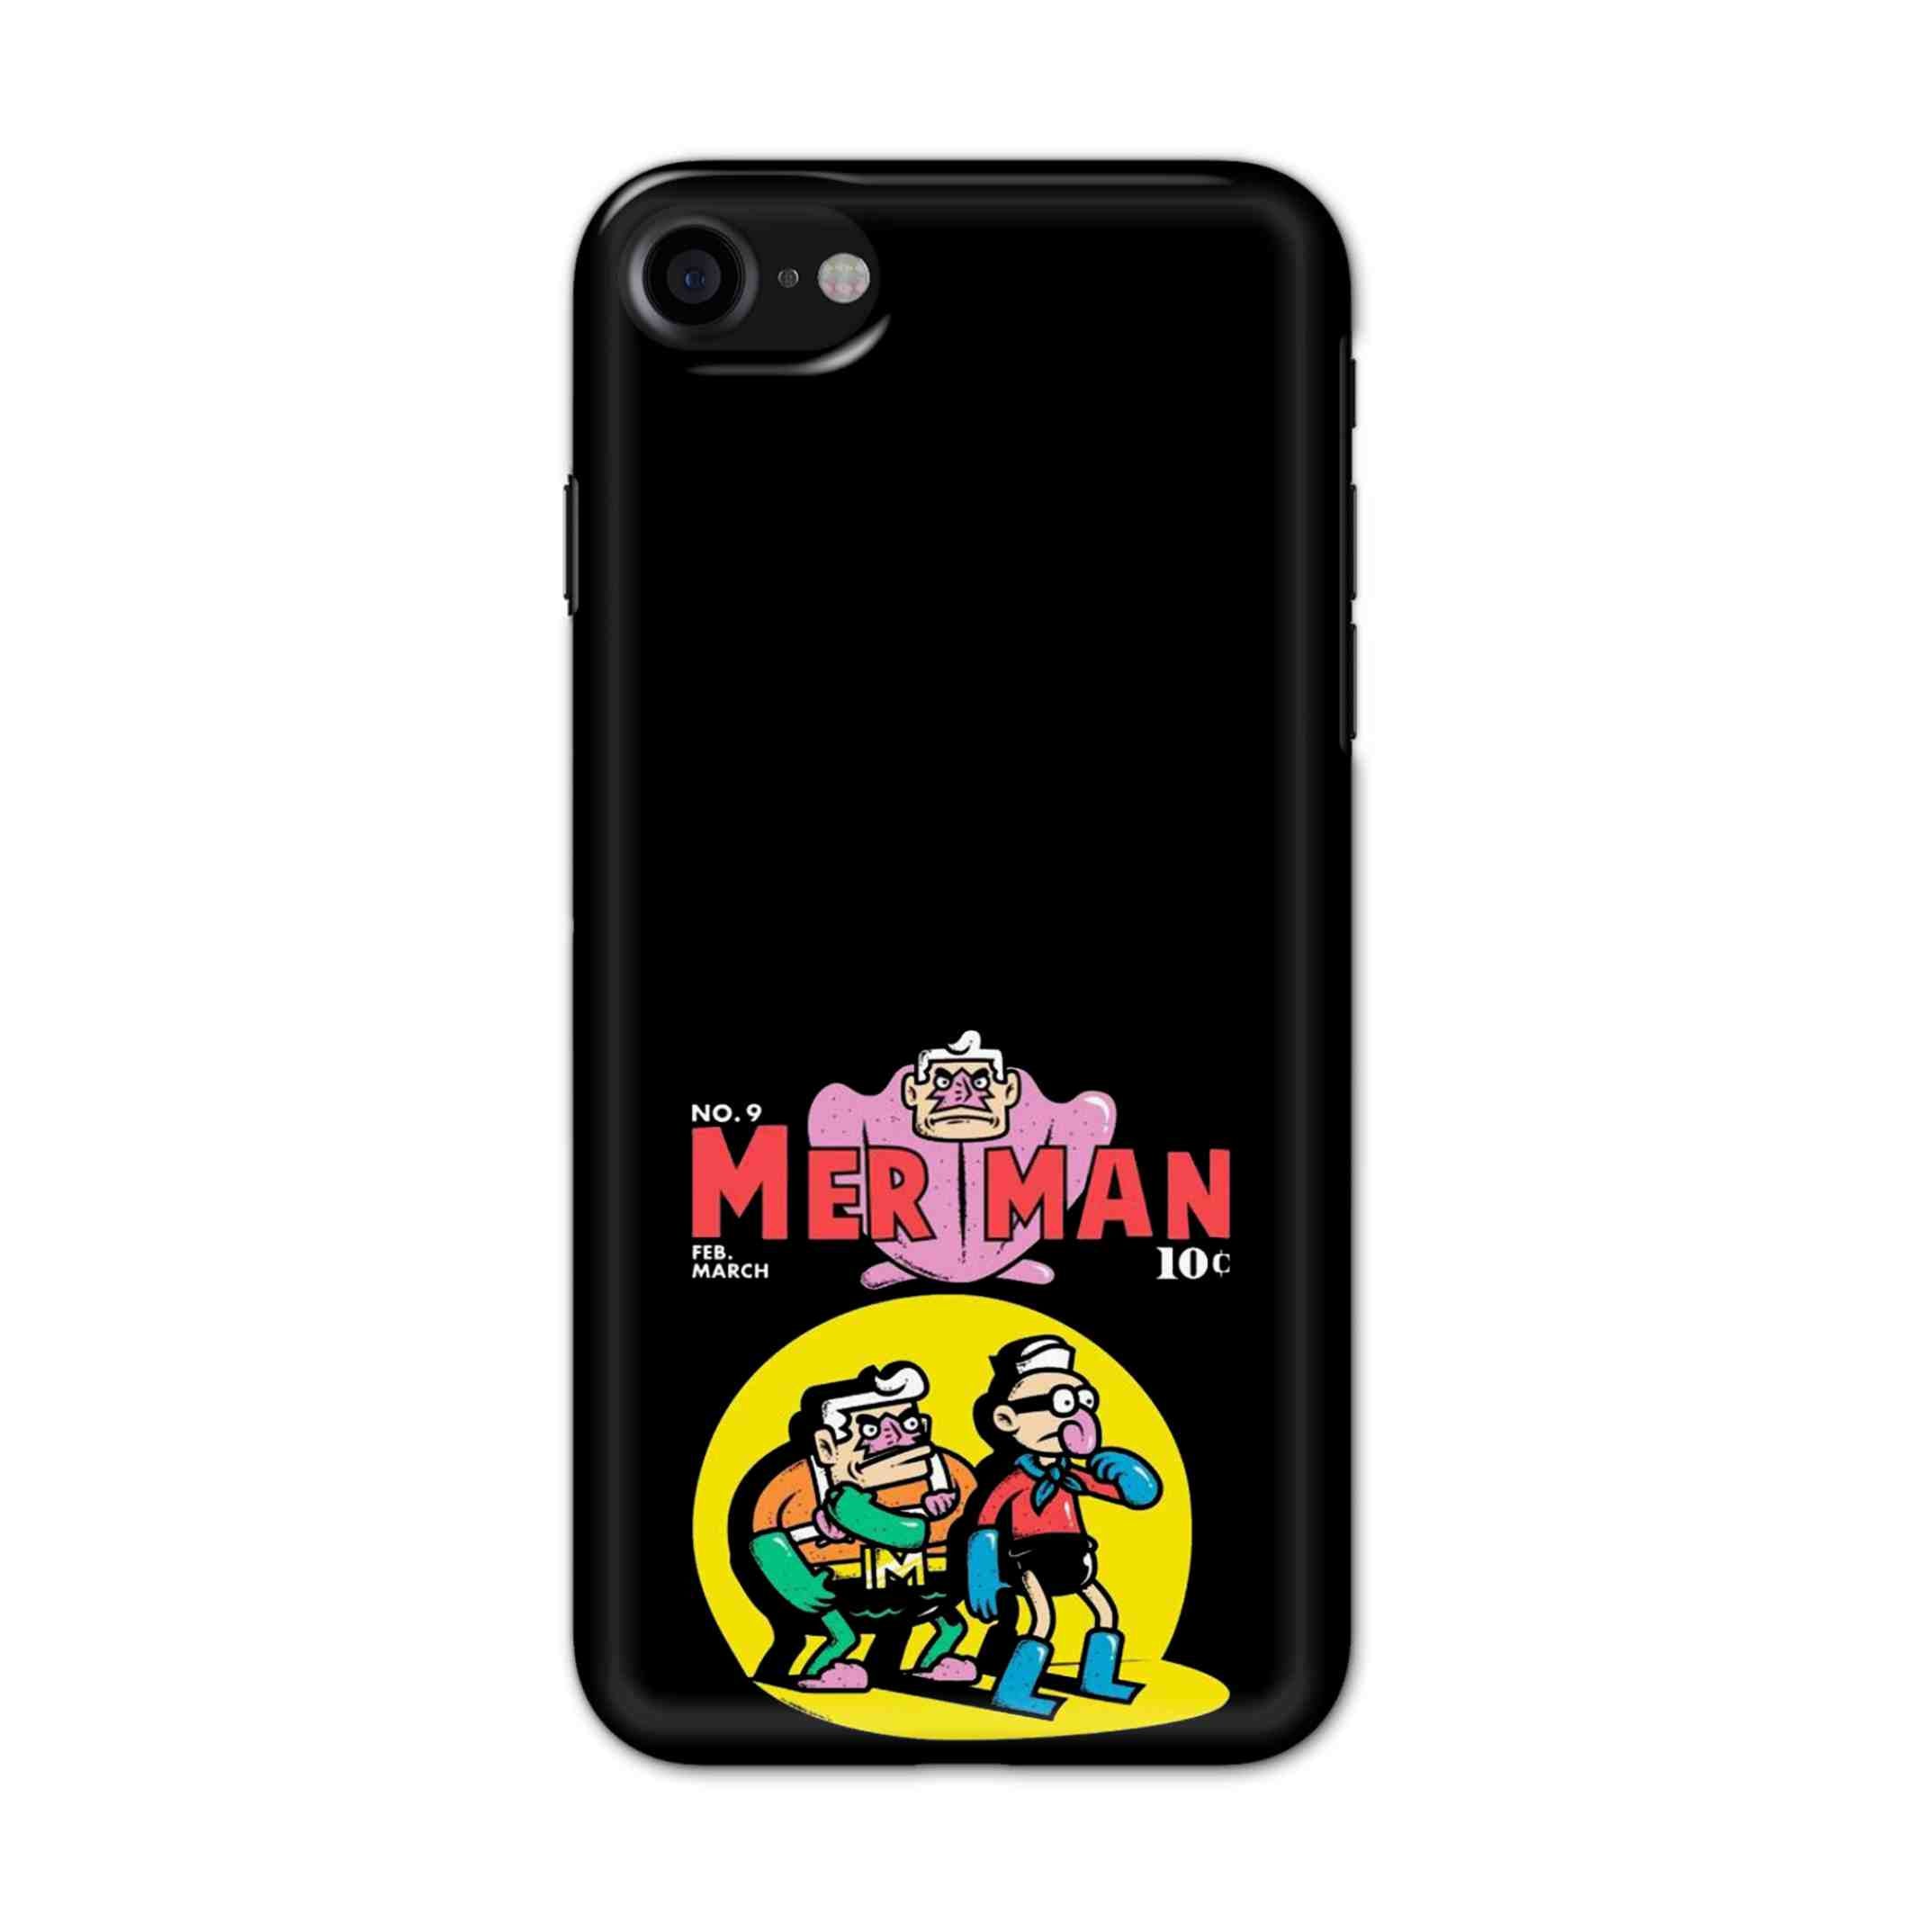 Buy Merman Hard Back Mobile Phone Case/Cover For iPhone 7 / 8 Online